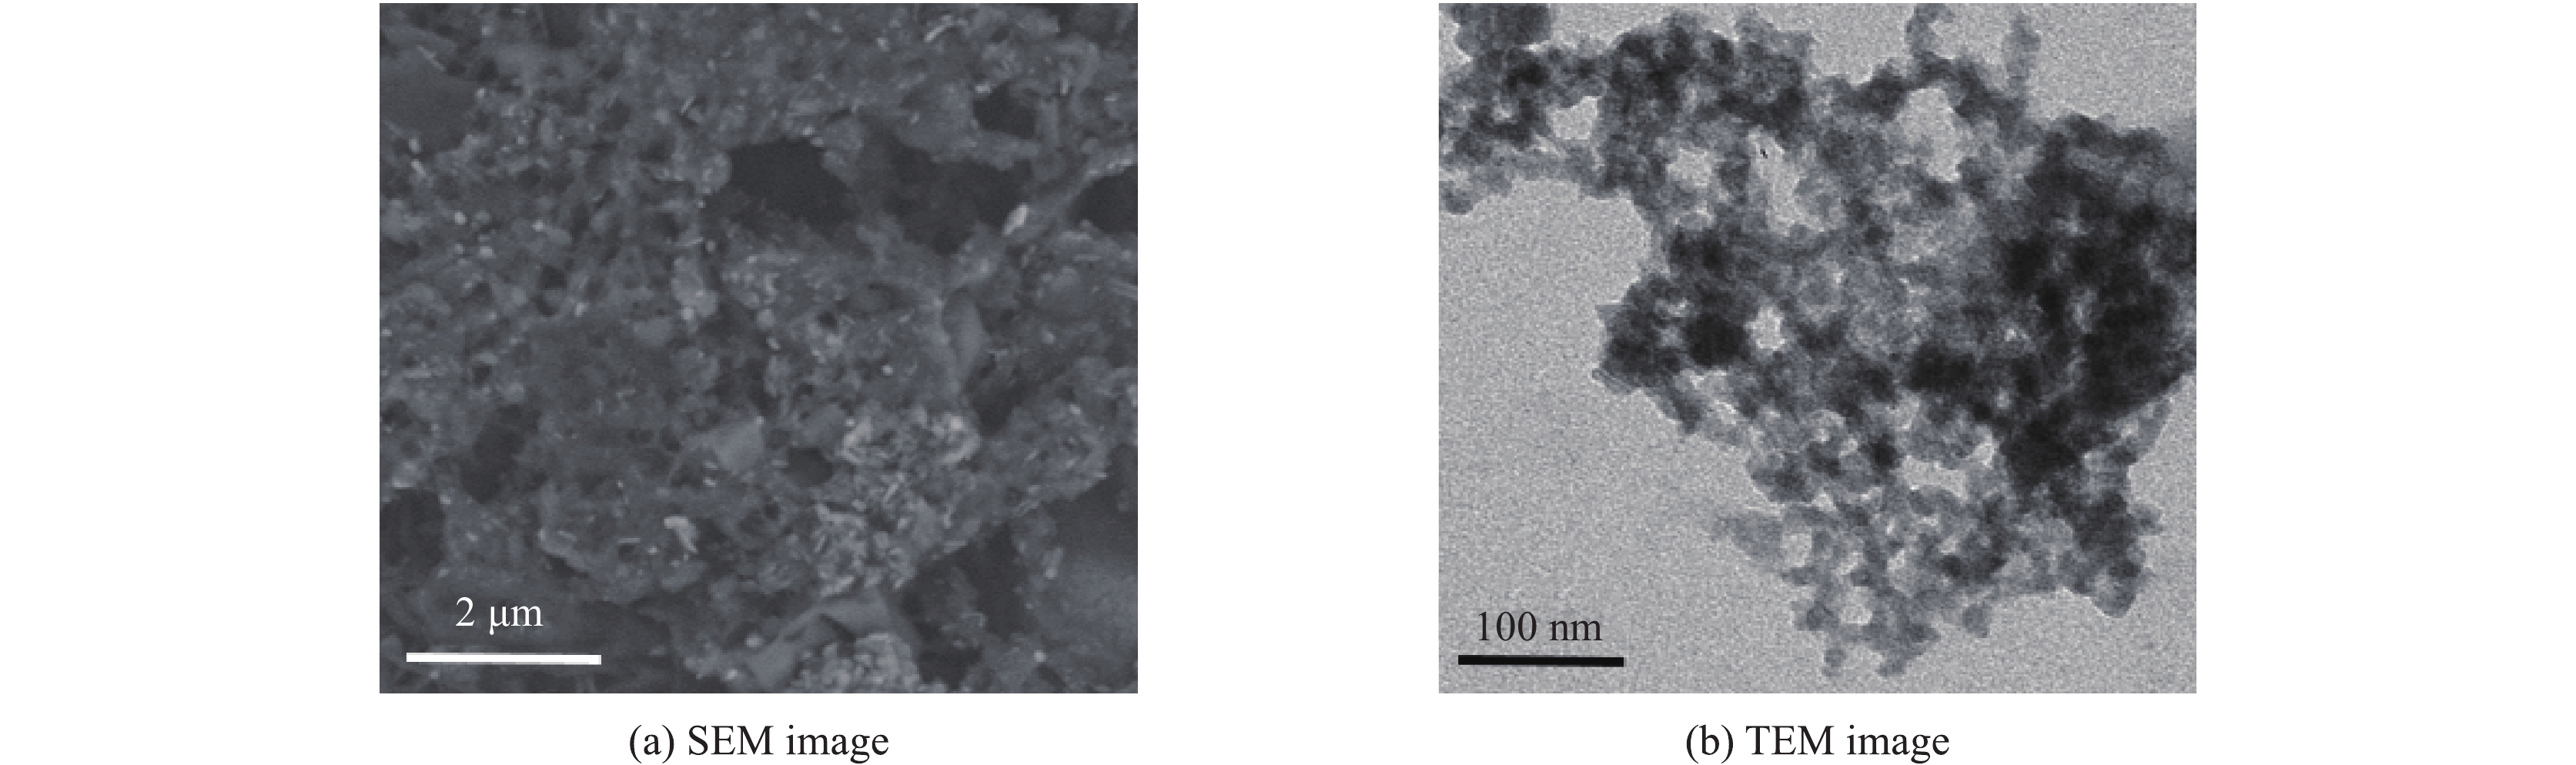 SEM and TEM images of the NbSe2 nanoparticles prepared by solution process